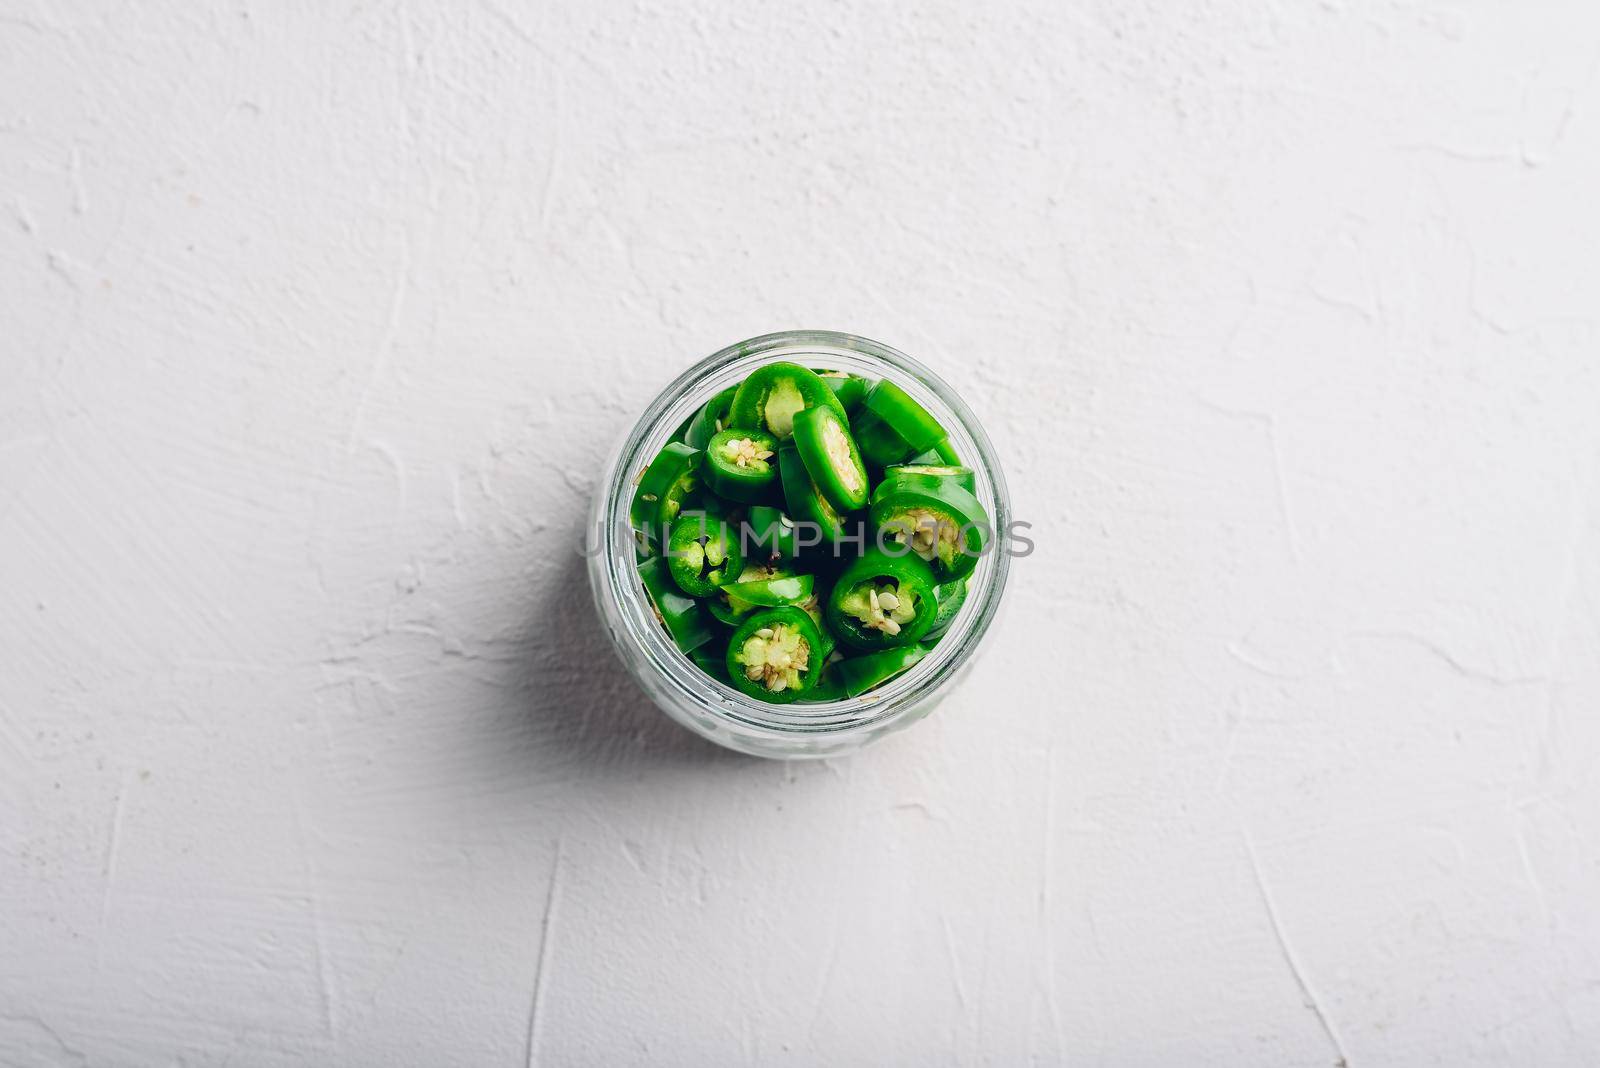 Sliced Jalapeno Peppers in Glass Jars for Canning on Light Concrete Background. View from Above